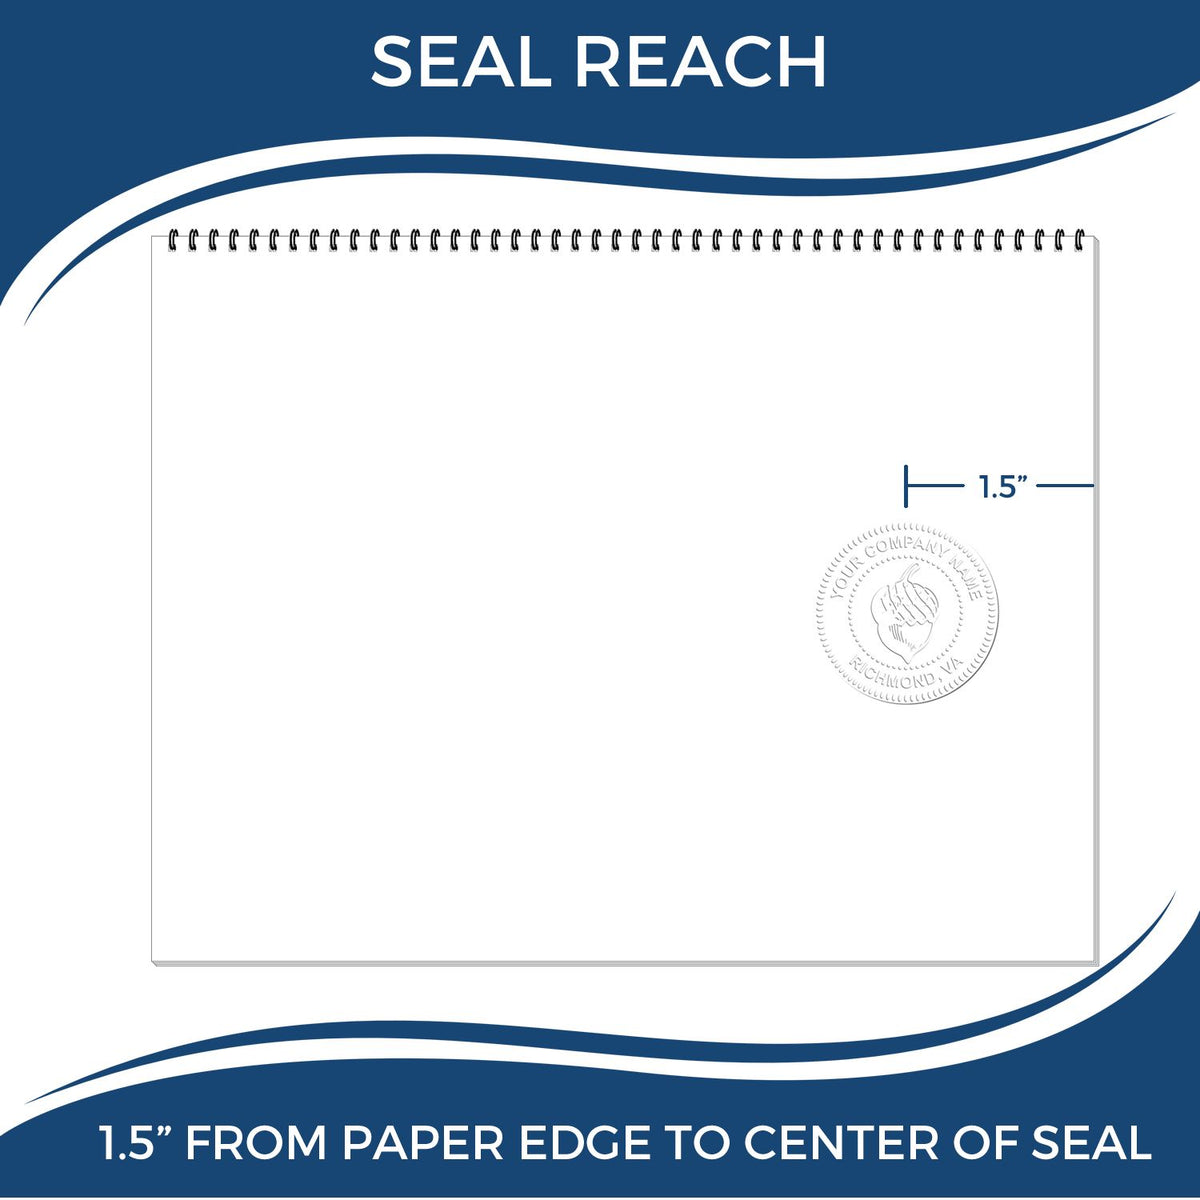 An infographic showing the seal reach which is represented by a ruler and a miniature seal image of the New Mexico Engineer Desk Seal